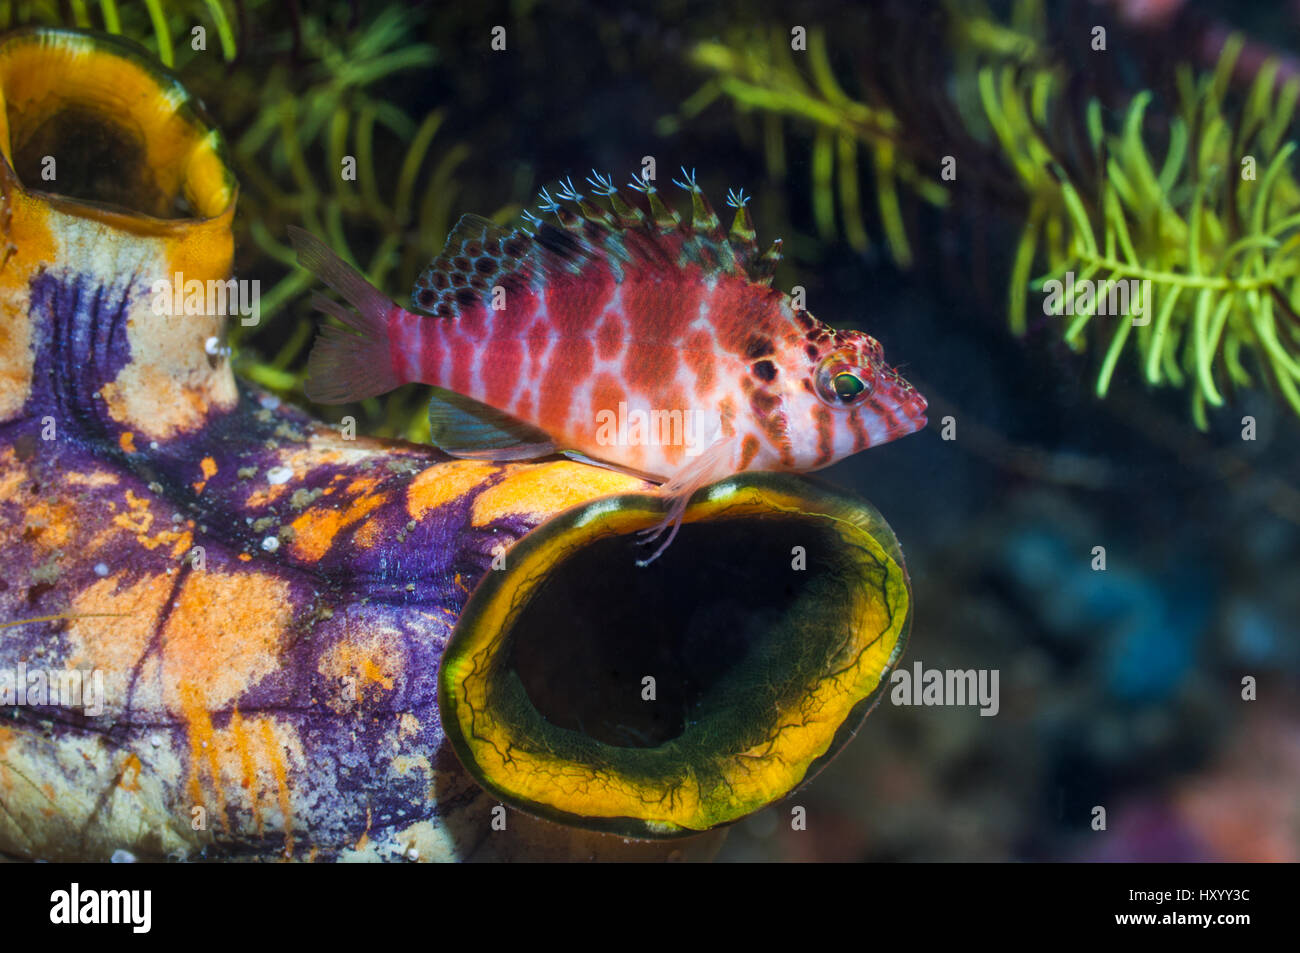 Spotted hawkfish (Cirrhitichthys aprinus) perched on Gold mouth sea squirt (Polycarpa aurata). West Papua, Indonesia. Stock Photo